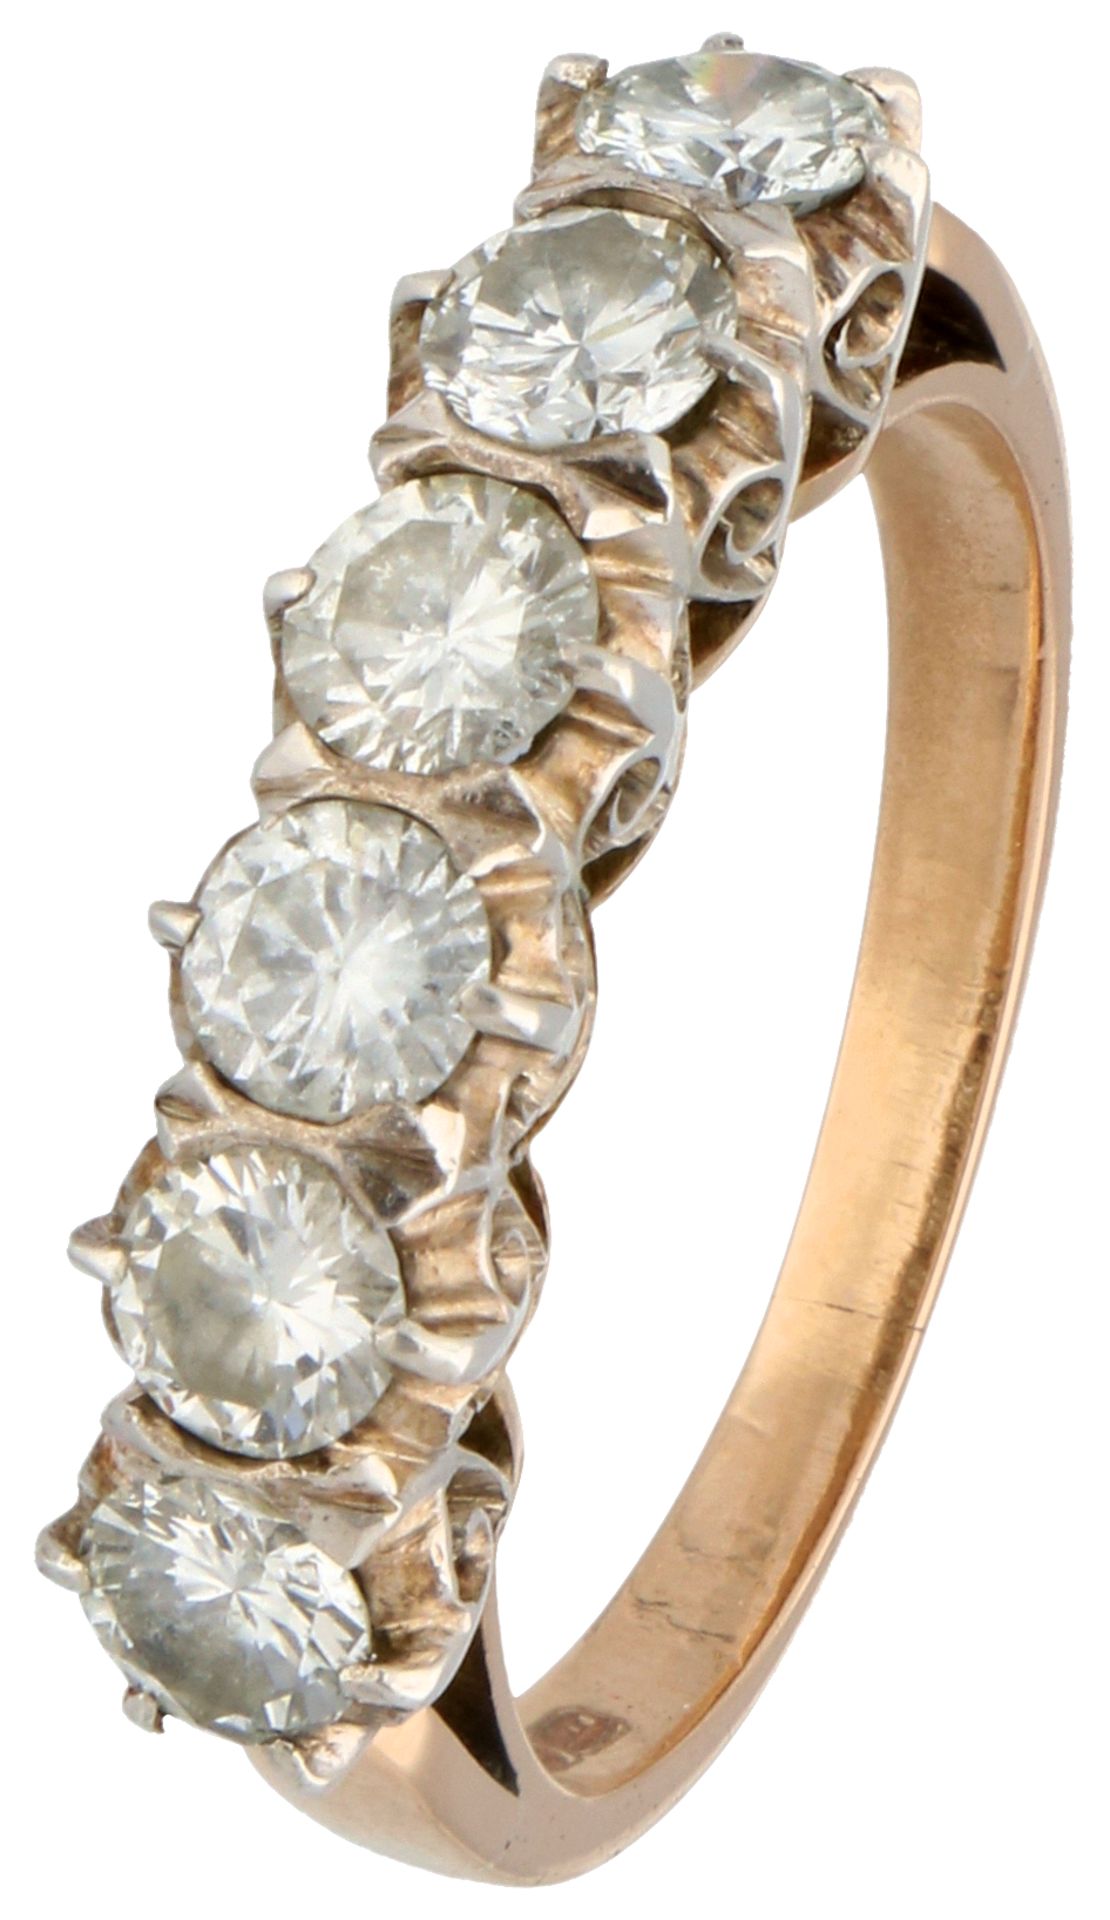 No Reserve - 14K Yellow gold/silver demi-alliance ring set with approx. 0.90 ct. diamond.